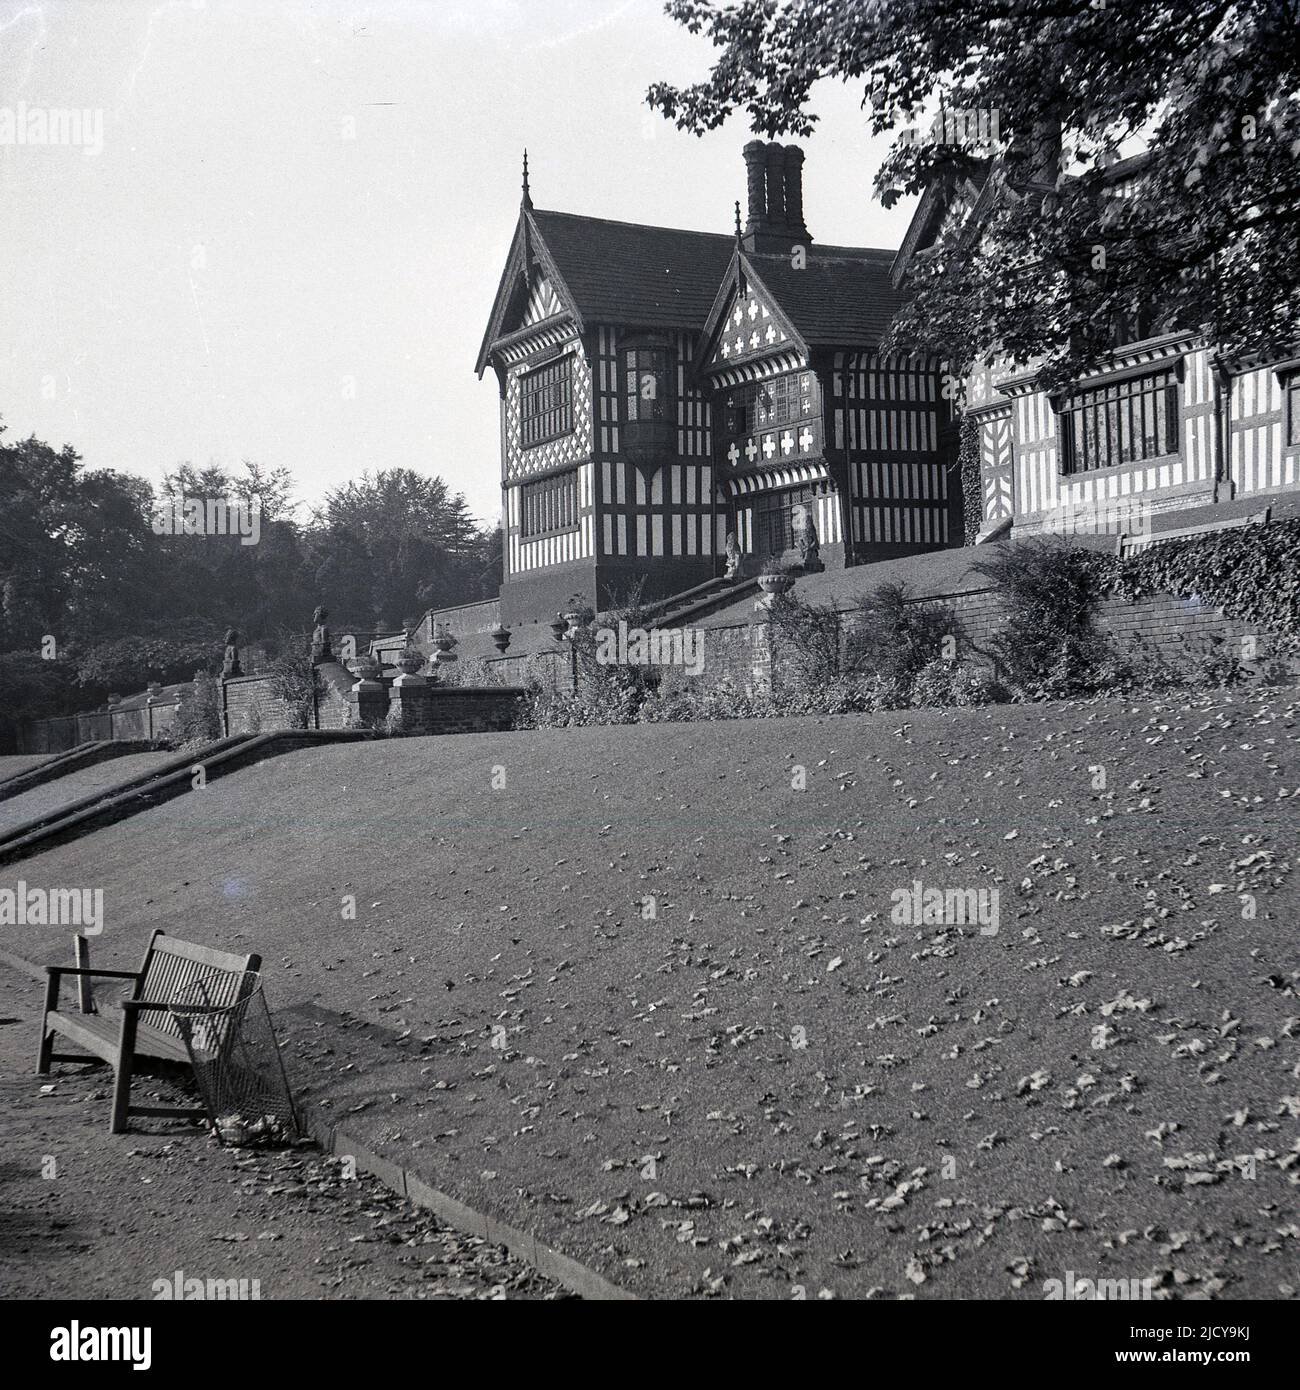 1940s, historical, view from the terraces of the rear of Bramall Hall, Bramhall, Stockport, England, UK. A timber-framed Tudor manor house that dates back to the 14th century, with later additions, the house and surrounding parkland was acquired by the local authority in 1935 and became a museum. The Davenport family, which it is believed built the house, held the manor for over 500 years. Stock Photo